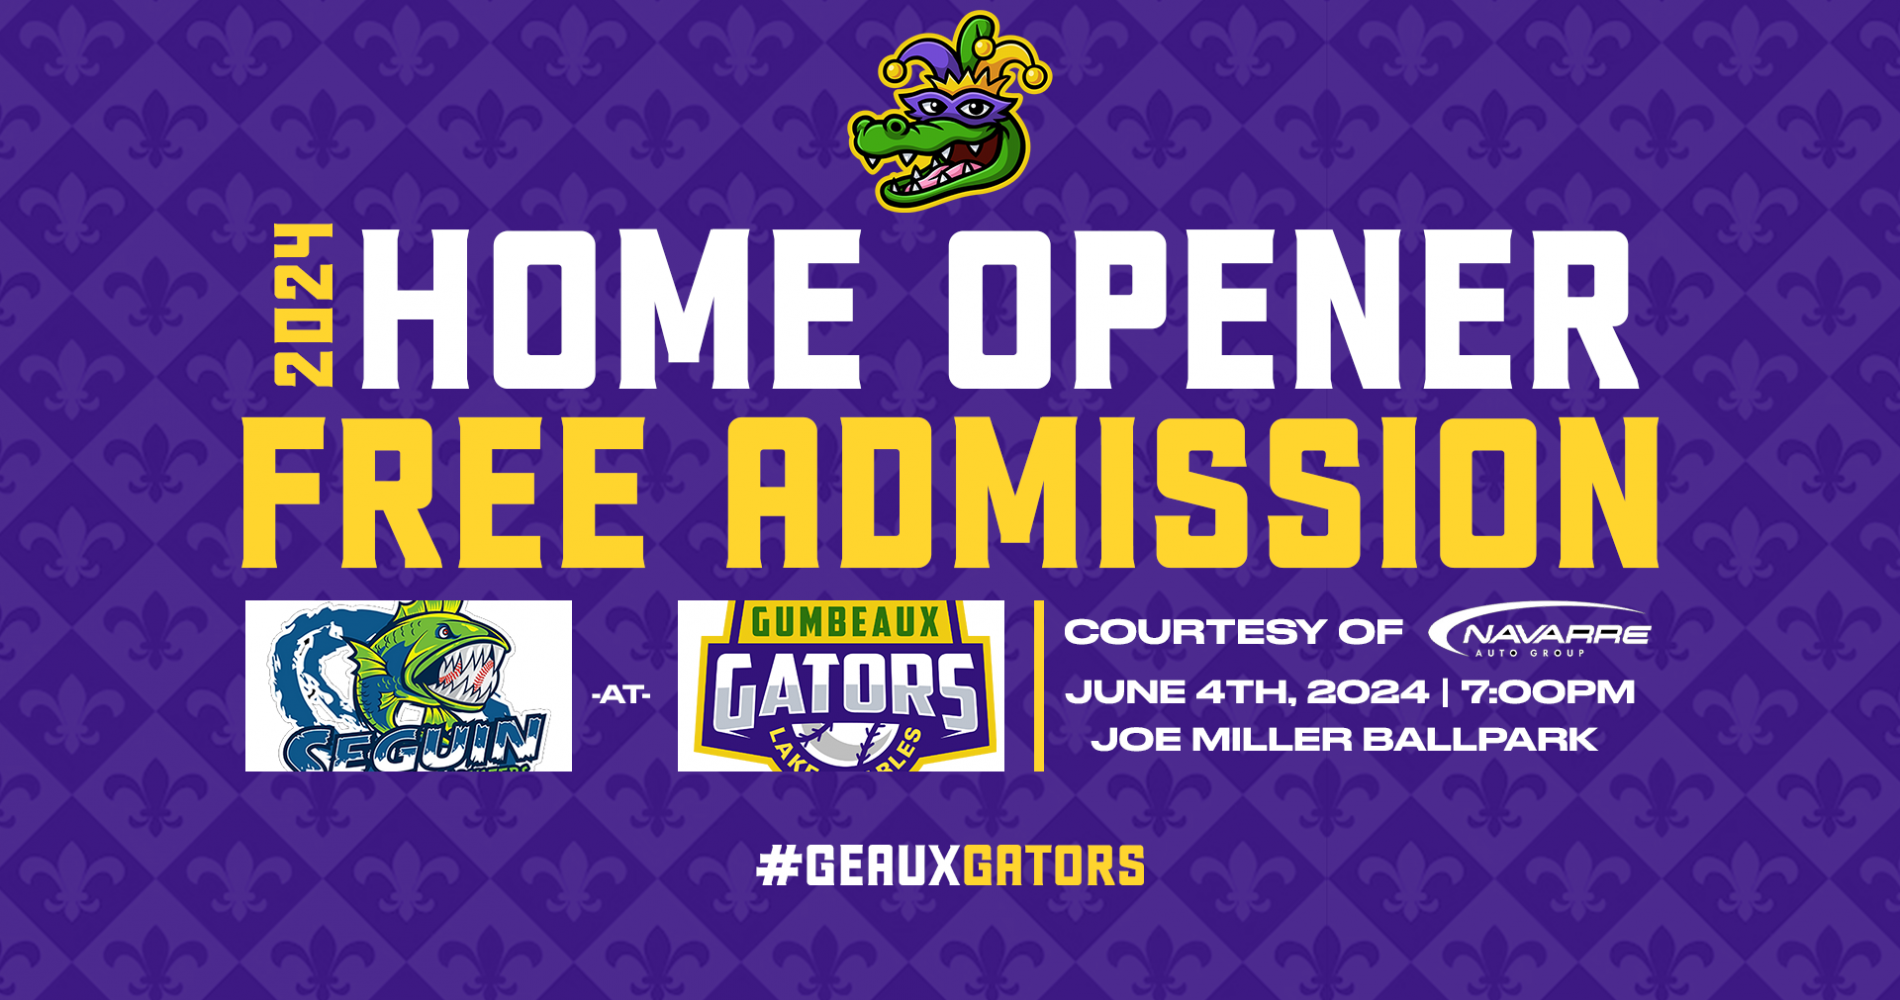 2024 Gumbeaux Gators Home Opener on June 4th set to be Free Admission